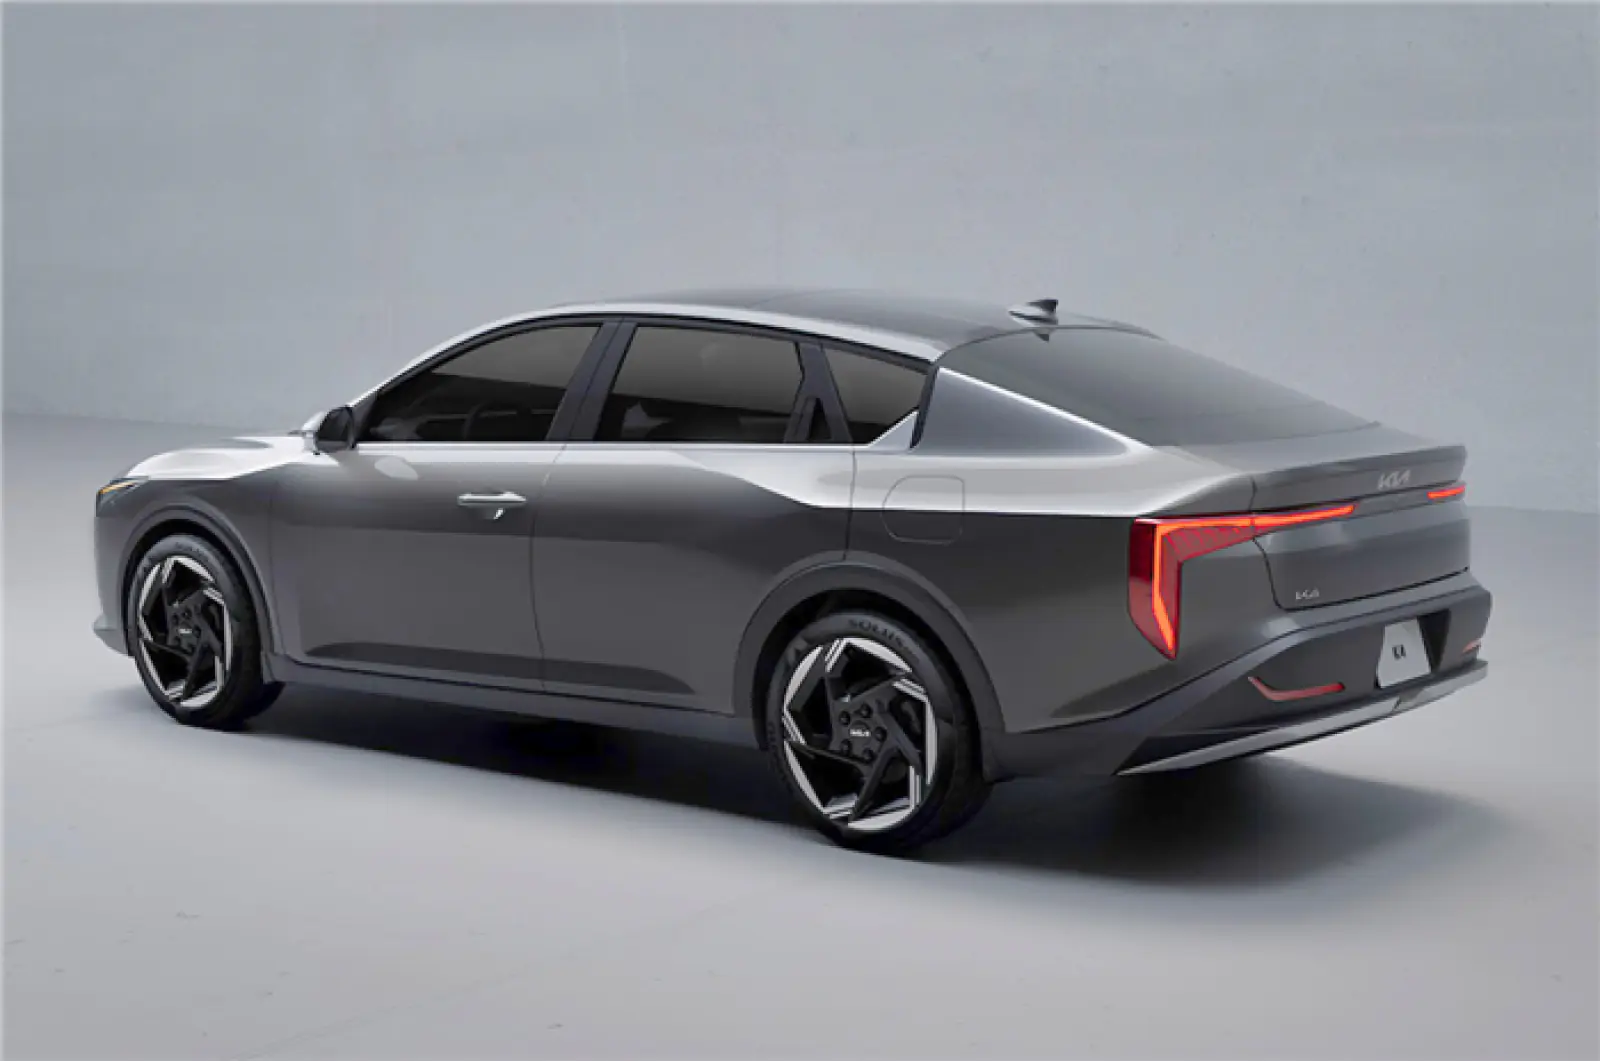 Kia showed a glimpse of the new generation Sedan Car K4, Know how it looks and what are the features